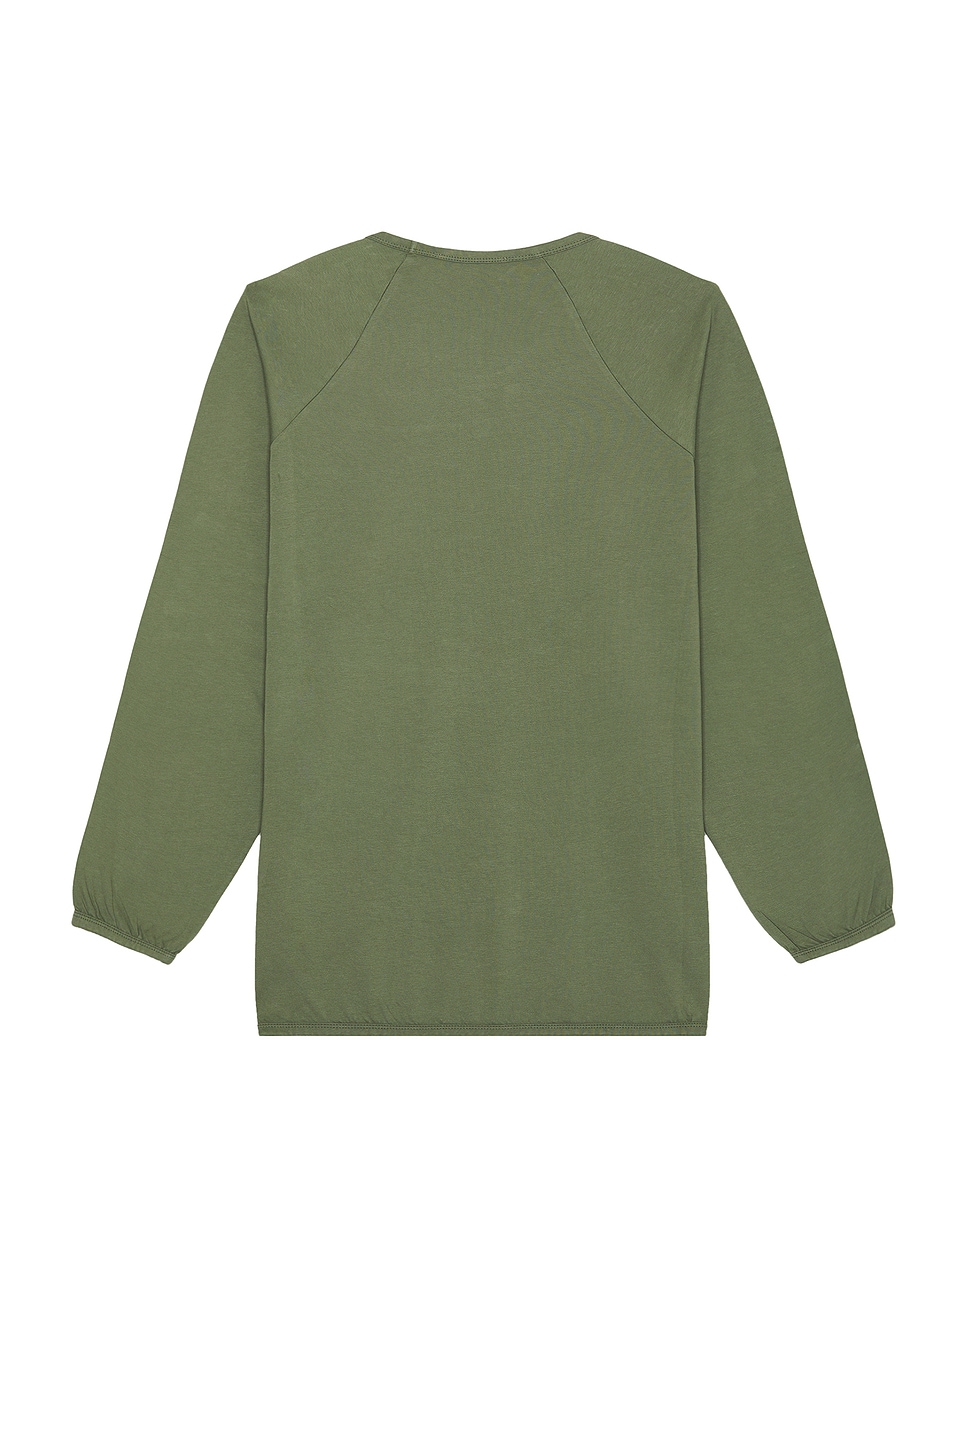 Shop Reebok X Hed Mayner Long Sleeve T-shirt In Army Green